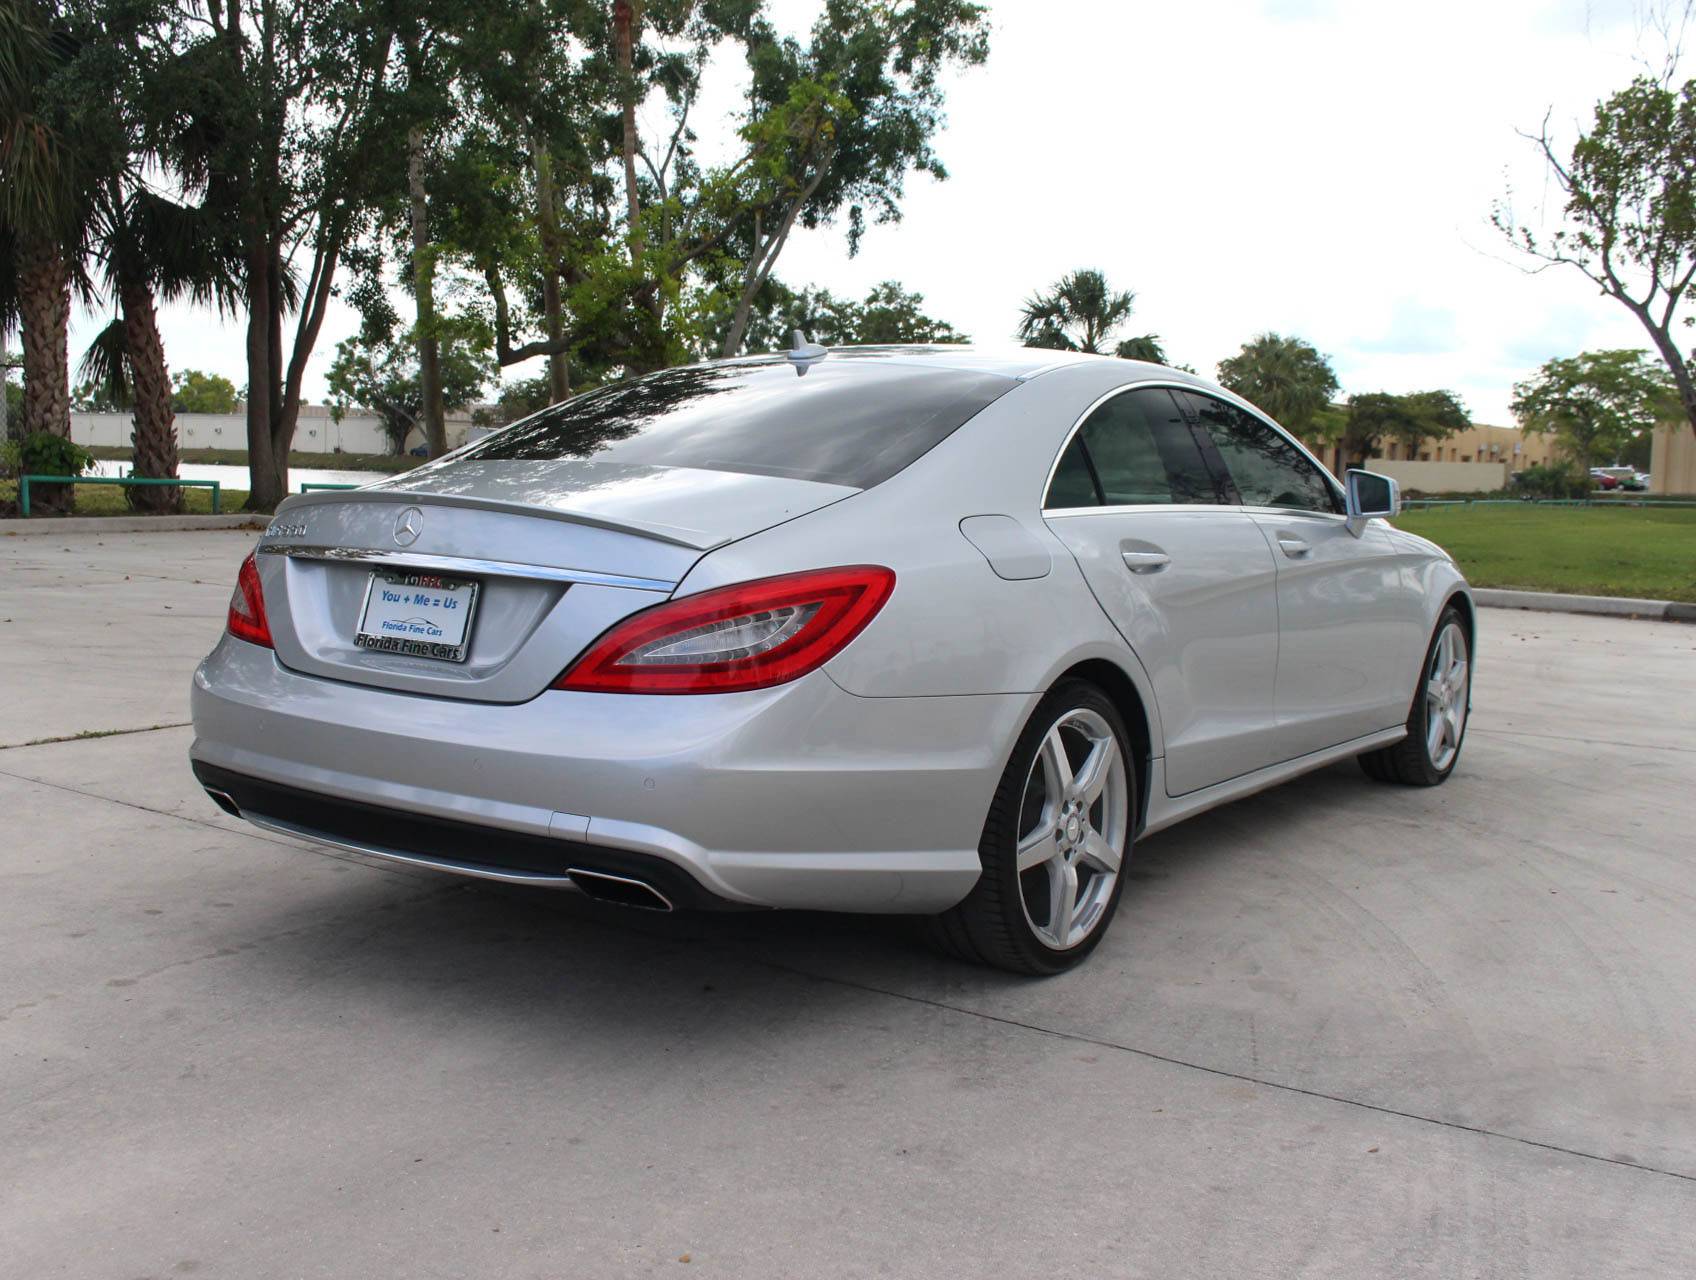 Florida Fine Cars - Used MERCEDES-BENZ CLS CLASS 2014 MARGATE CLS550